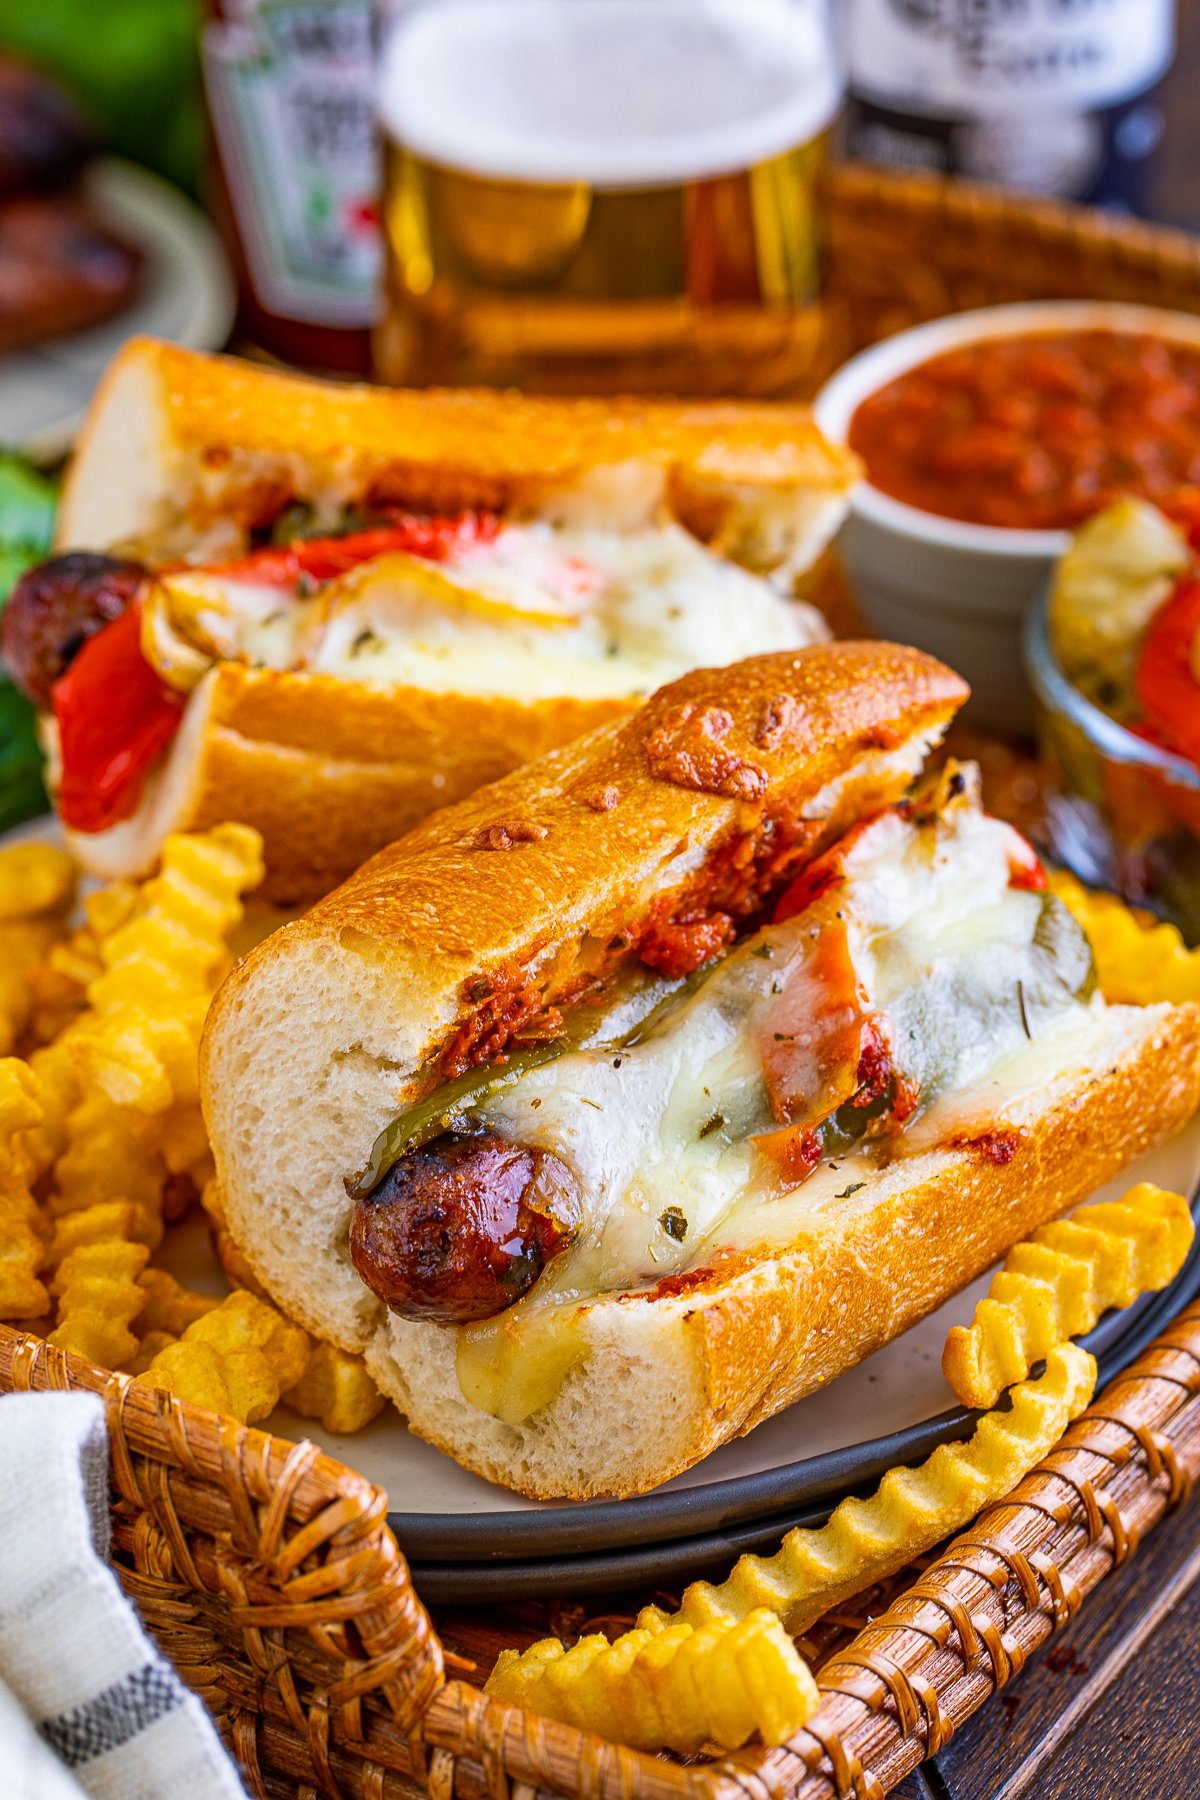 Two Grilled Italian Sausage Sandwiches on wicker board surrounded by french fries.